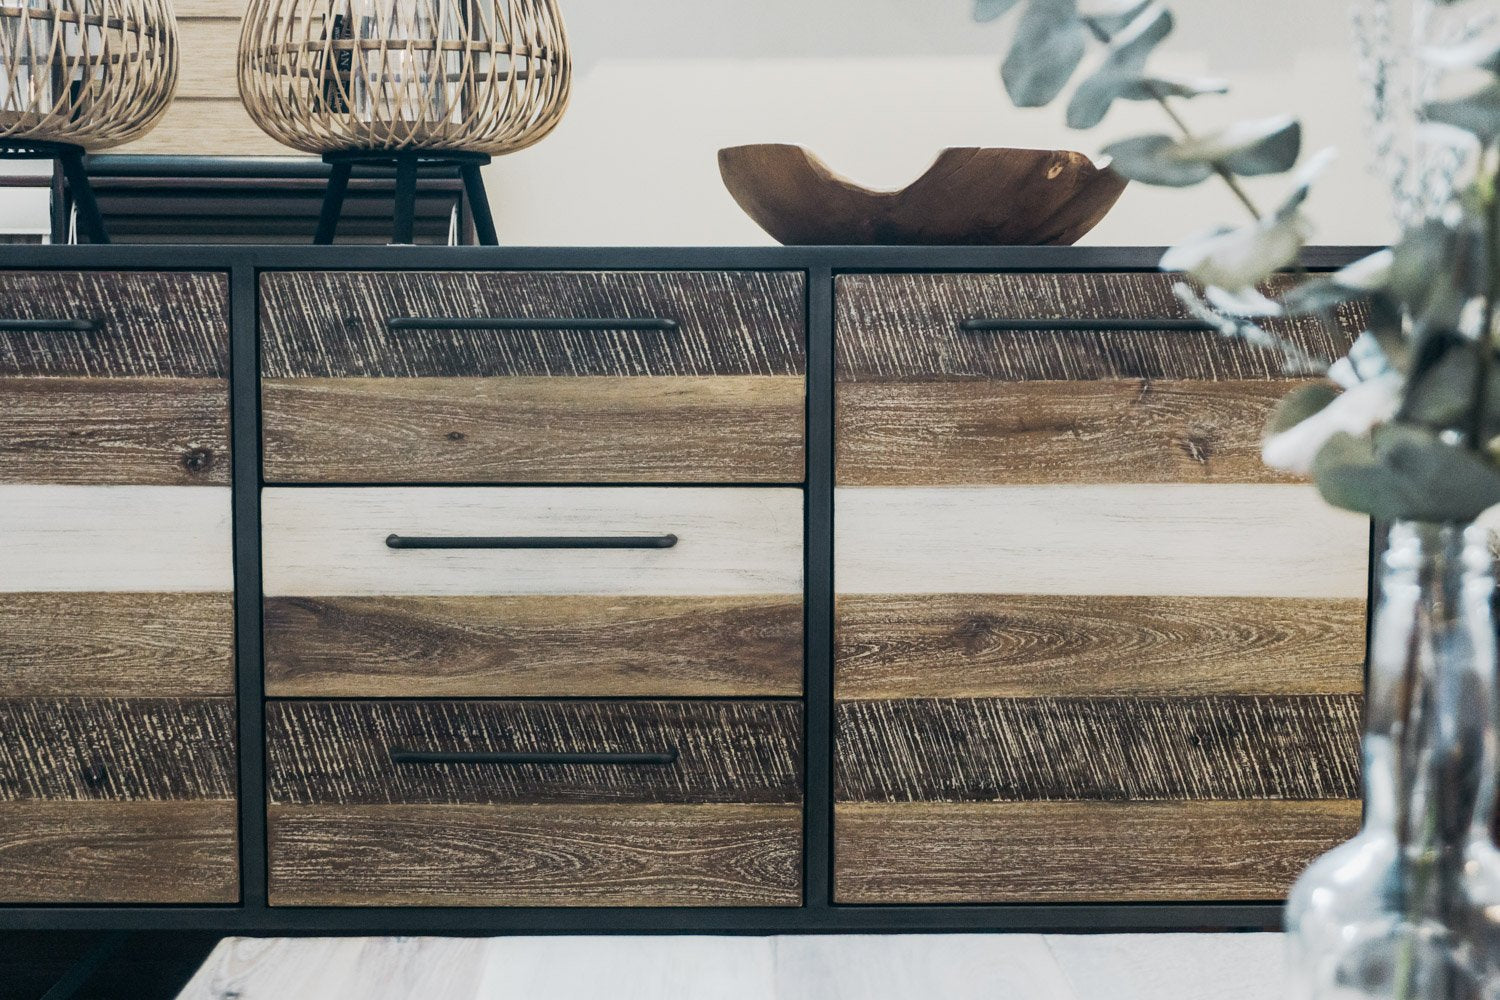 A Credenza adds a touch of class to a dining area whilst still providing important storage function. Urban Settler carries credenzas, sideboards and buffets in range of styles and sizes. Browse and shop online. 